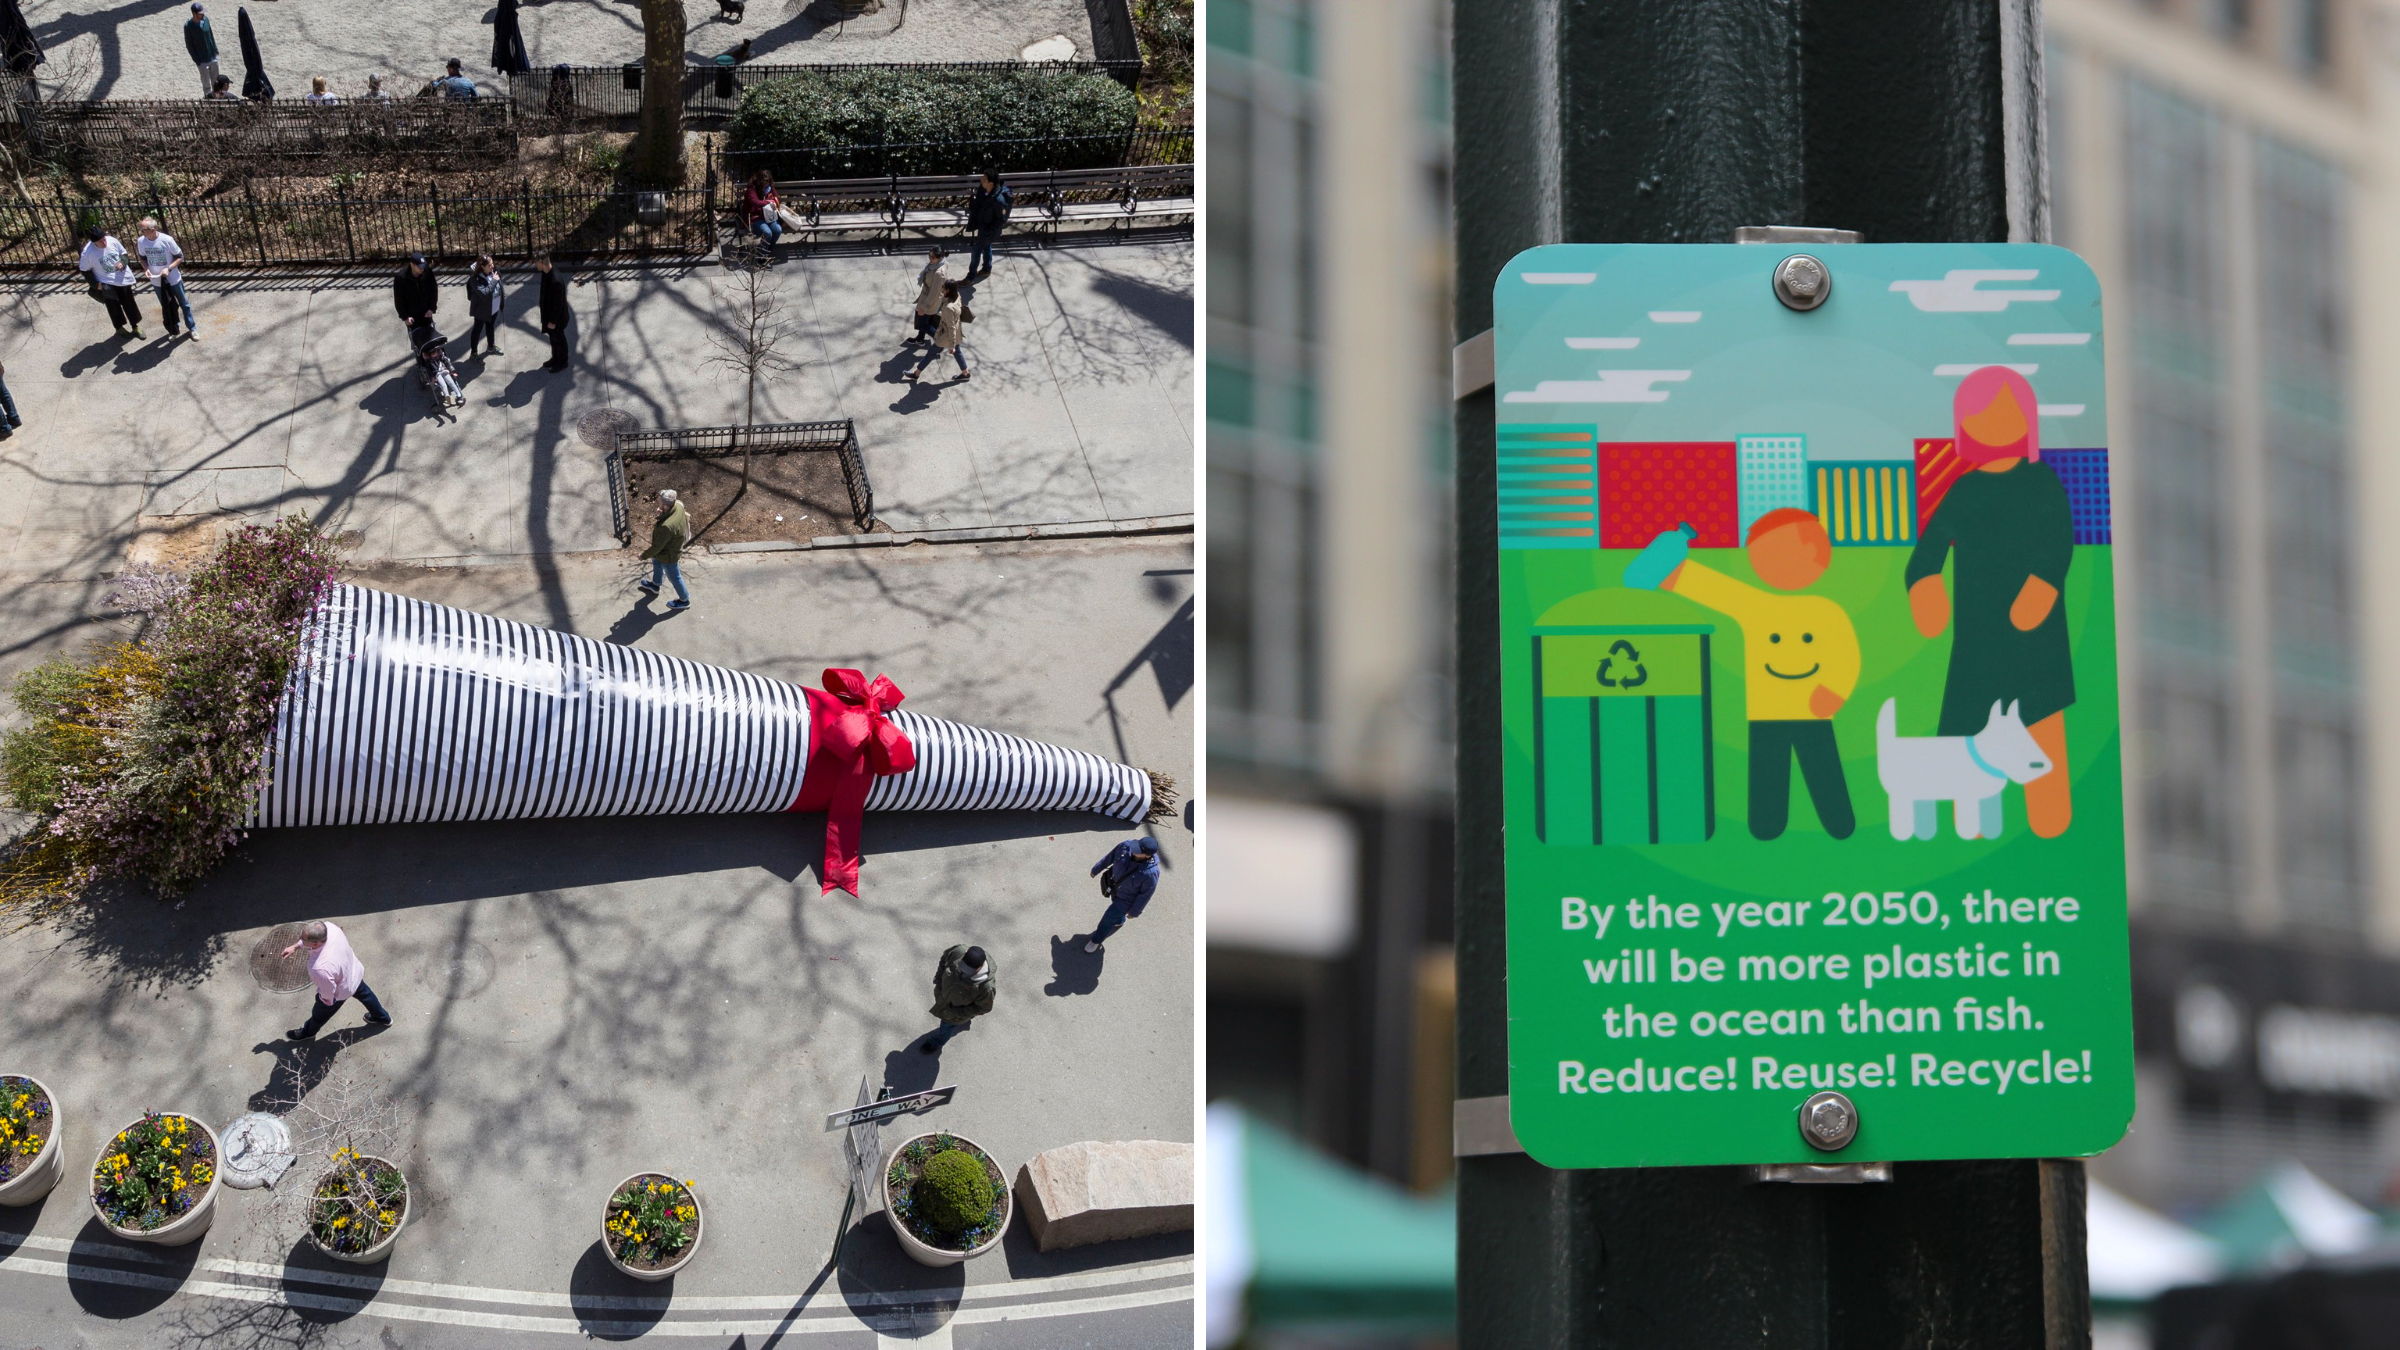 A huge bouquet of flowers is setup in a pedestrian plaza during an earth day event;a colorful illustration with reduce, reuse and recycle information is displayed on a small sign on a streetlight pole in N Y C.